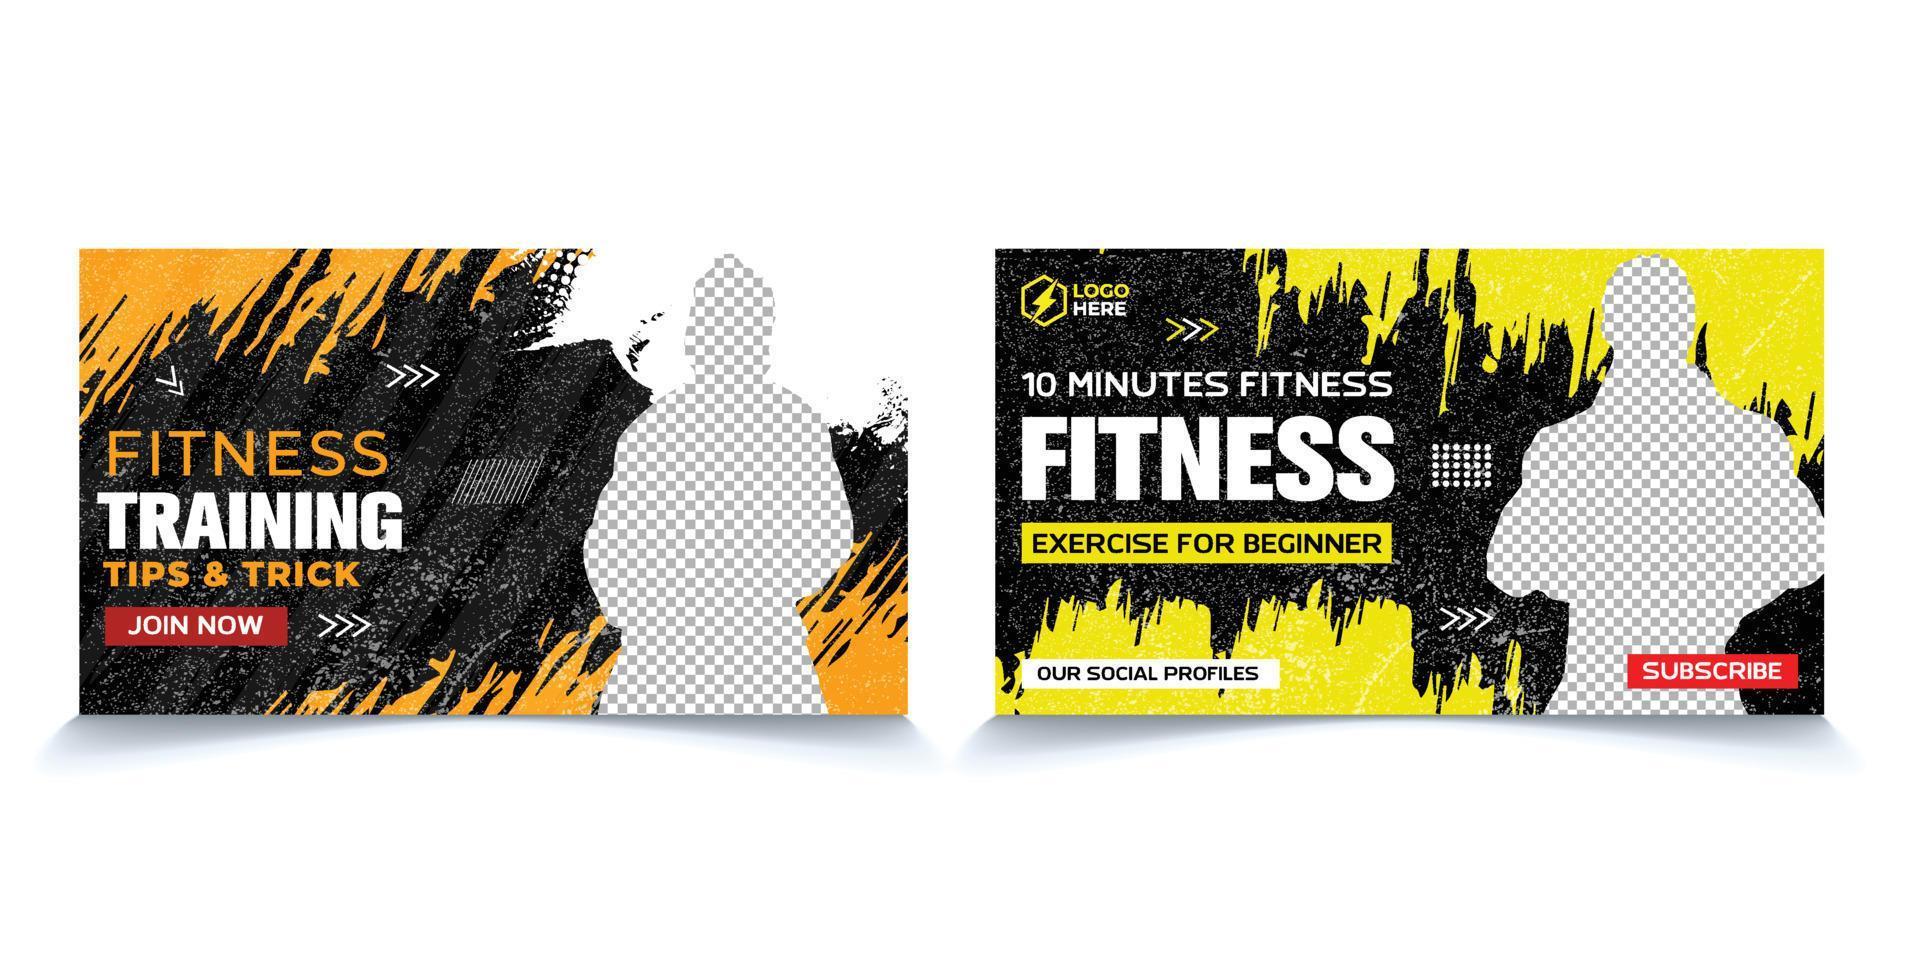 Fitness gym thumbnail and social media web banner template vector